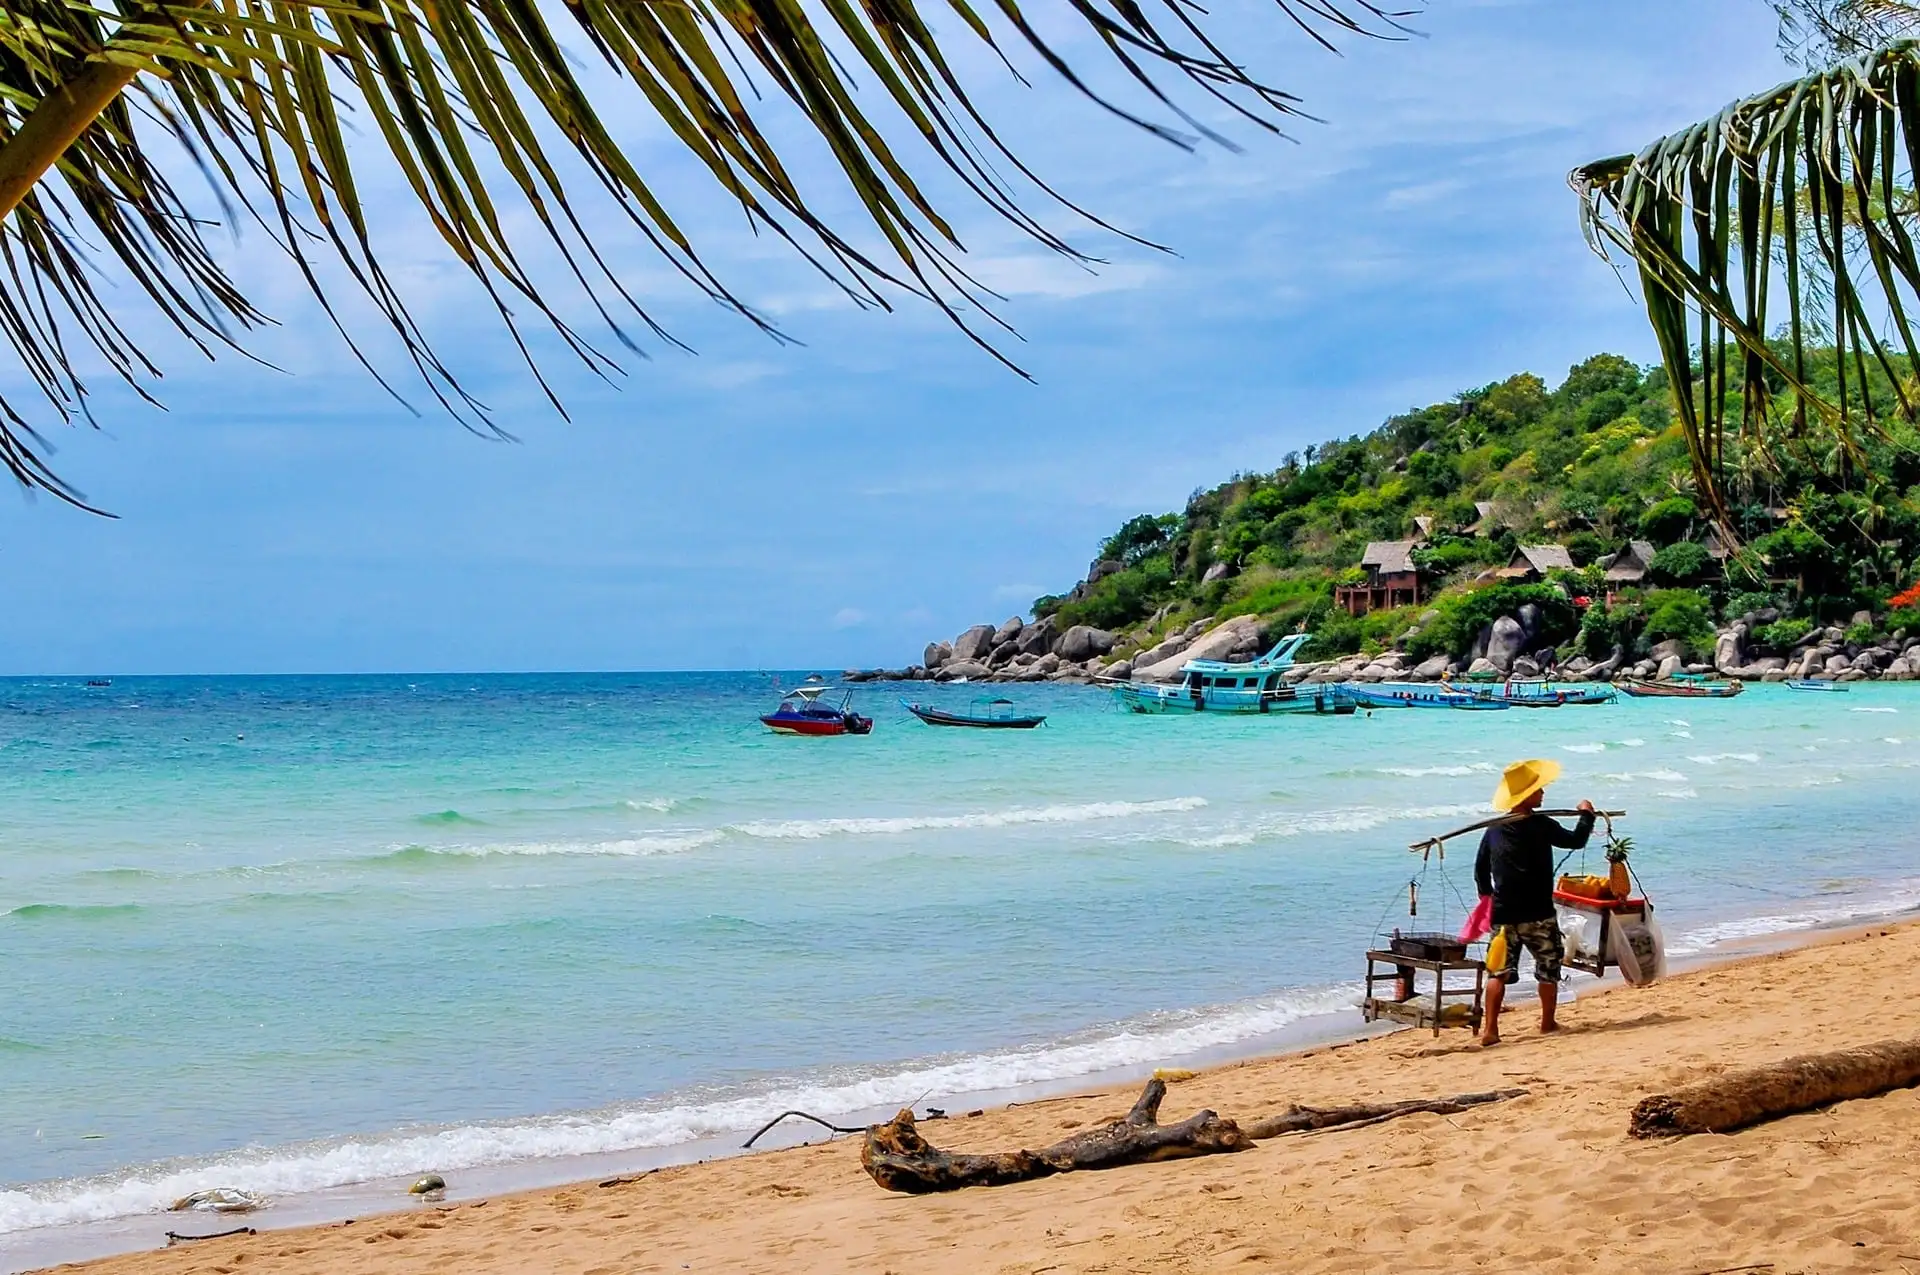 Sairee Beach on Ko Tao Island 10 pros and cons informations for used as information for decision making